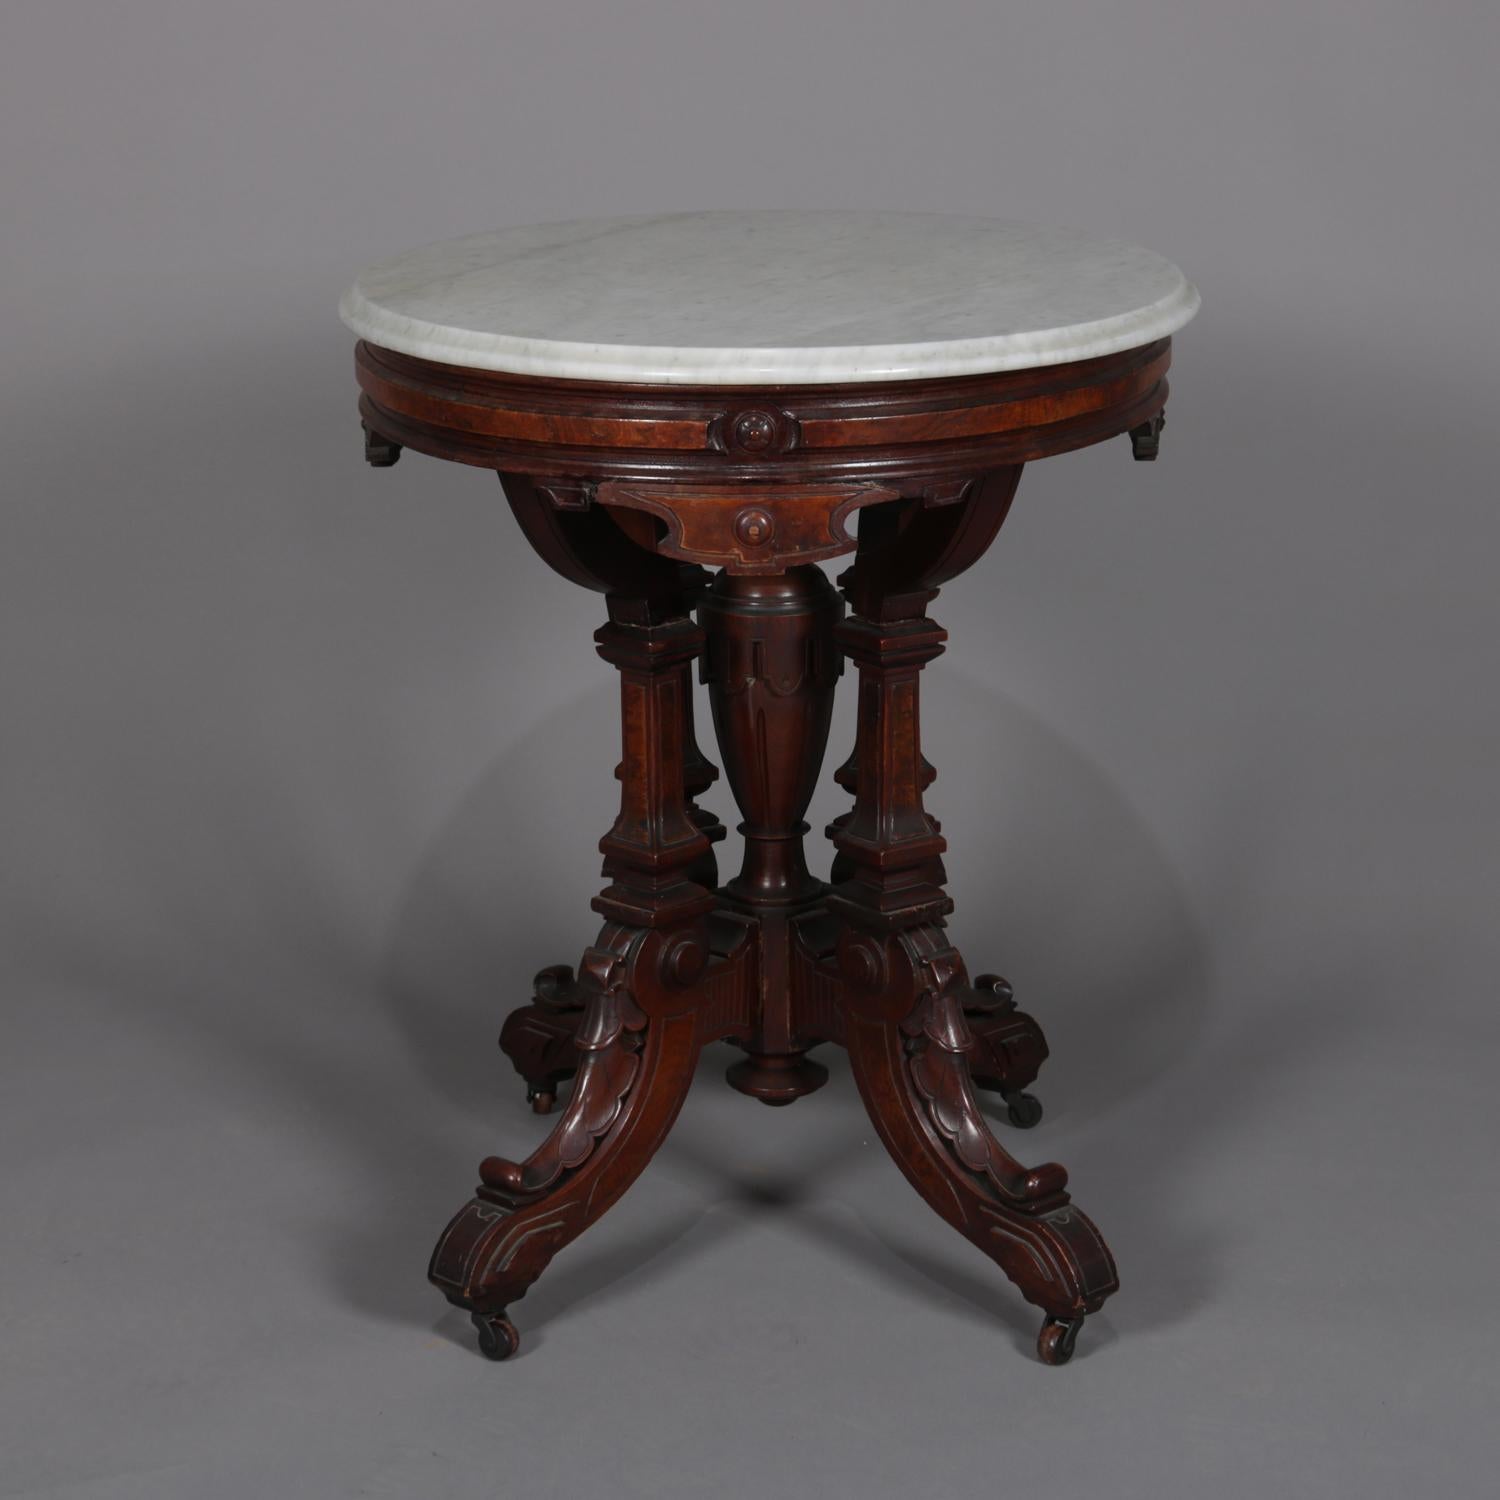 American Antique Eastlake Carved Walnut and Burl Marble Top Oval Centre Table, circa 1870